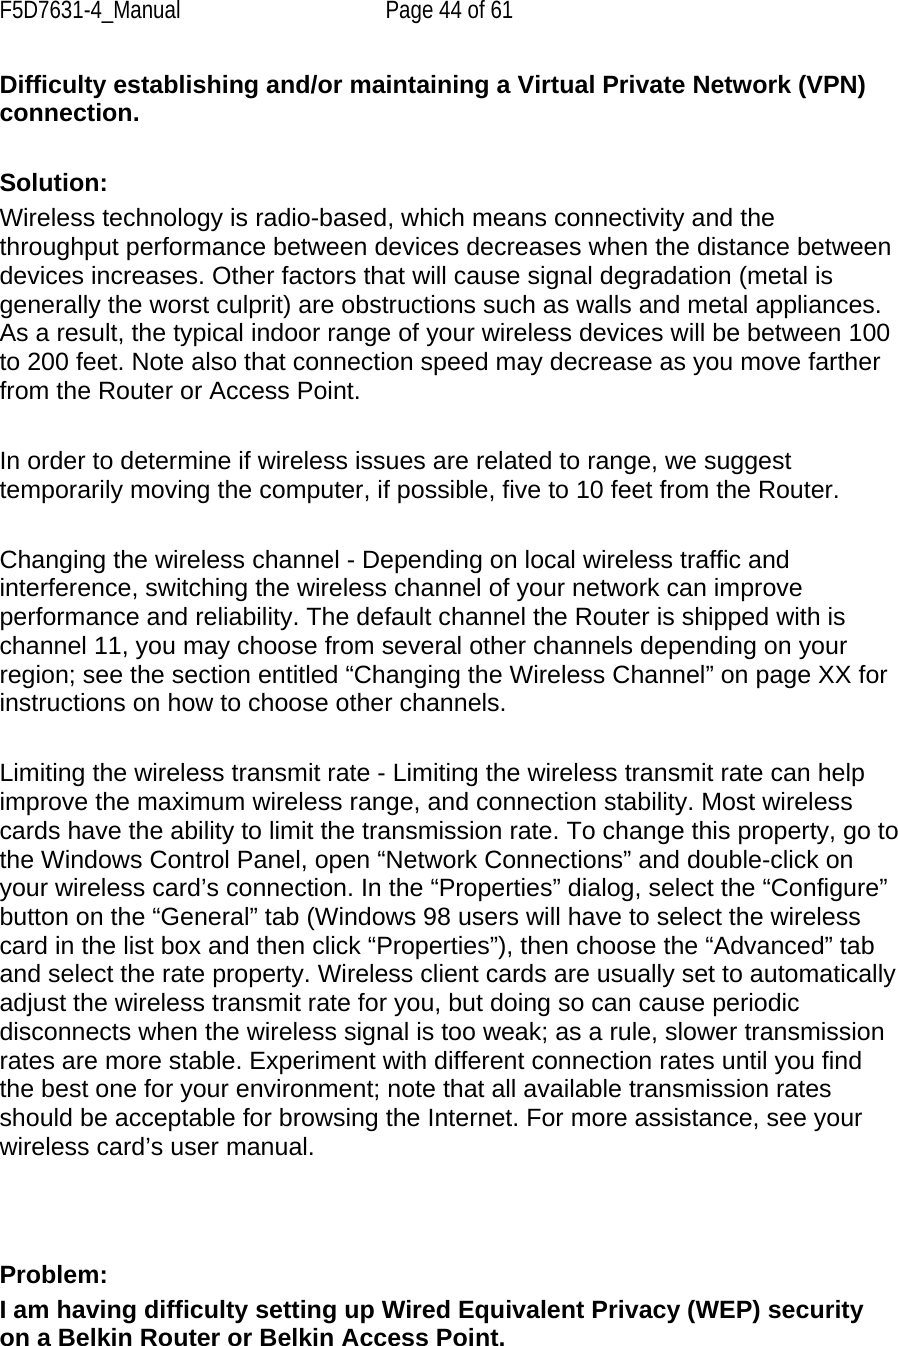 F5D7631-4_Manual  Page 44 of 61 Difficulty establishing and/or maintaining a Virtual Private Network (VPN) connection.  Solution: Wireless technology is radio-based, which means connectivity and the throughput performance between devices decreases when the distance between devices increases. Other factors that will cause signal degradation (metal is generally the worst culprit) are obstructions such as walls and metal appliances. As a result, the typical indoor range of your wireless devices will be between 100 to 200 feet. Note also that connection speed may decrease as you move farther from the Router or Access Point.   In order to determine if wireless issues are related to range, we suggest temporarily moving the computer, if possible, five to 10 feet from the Router.   Changing the wireless channel - Depending on local wireless traffic and interference, switching the wireless channel of your network can improve performance and reliability. The default channel the Router is shipped with is channel 11, you may choose from several other channels depending on your region; see the section entitled “Changing the Wireless Channel” on page XX for instructions on how to choose other channels.   Limiting the wireless transmit rate - Limiting the wireless transmit rate can help improve the maximum wireless range, and connection stability. Most wireless cards have the ability to limit the transmission rate. To change this property, go to the Windows Control Panel, open “Network Connections” and double-click onyour wireless card’s connection. In the “Properties” dialog, select the “Configure” button on the “General” tab (Windows 98 users will have to select the wireless card in the list box and then click “Properties”), then choose the “Advanced” tab and select the rate property. Wireless client cards are usually set to automatically adjust the wireless transmit rate for you, but doing so can cause periodic disconnects when the wireless signal is too weak; as a rule, slower transmission rates are more stable. Experiment with different connection rates until you find the best one for your environment; note that all available transmission rates should be acceptable for browsing the Internet. For more assistance, see your wireless card’s user manual.    Problem: I am having difficulty setting up Wired Equivalent Privacy (WEP) security on a Belkin Router or Belkin Access Point.  